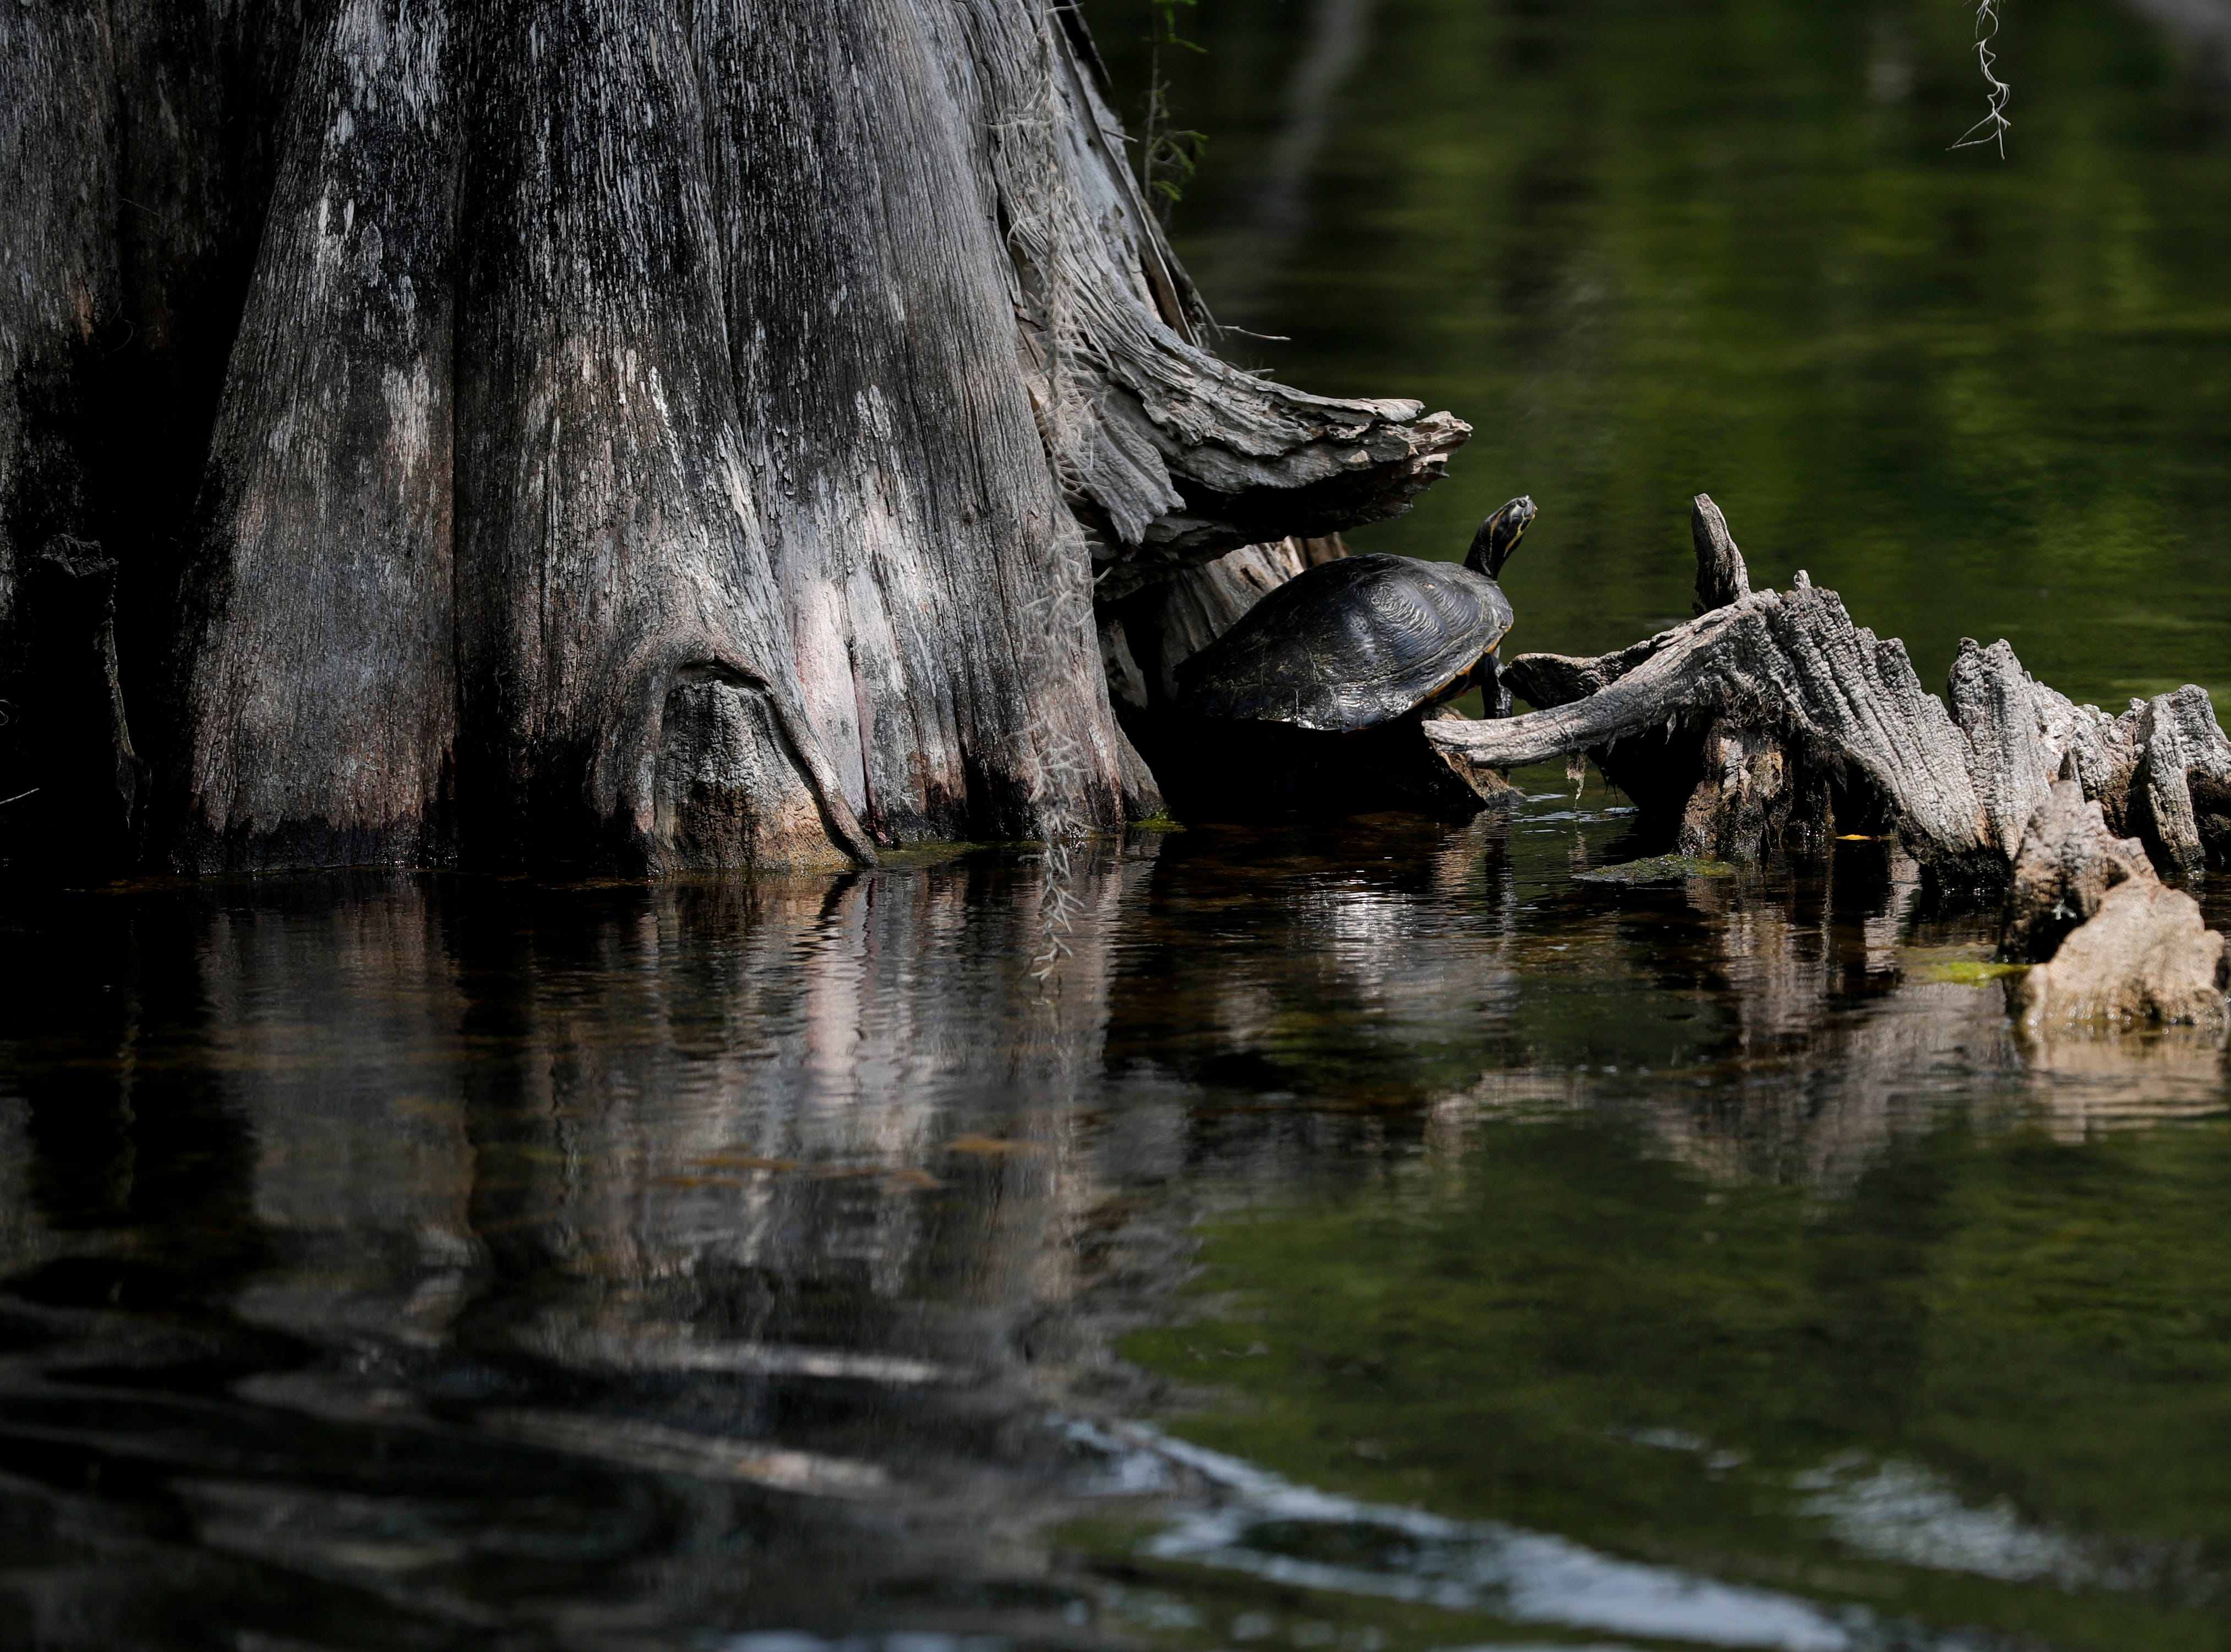 A turtle sticks its head out in a patch of sunlight at the foot of a tree along Wakulla Springs.